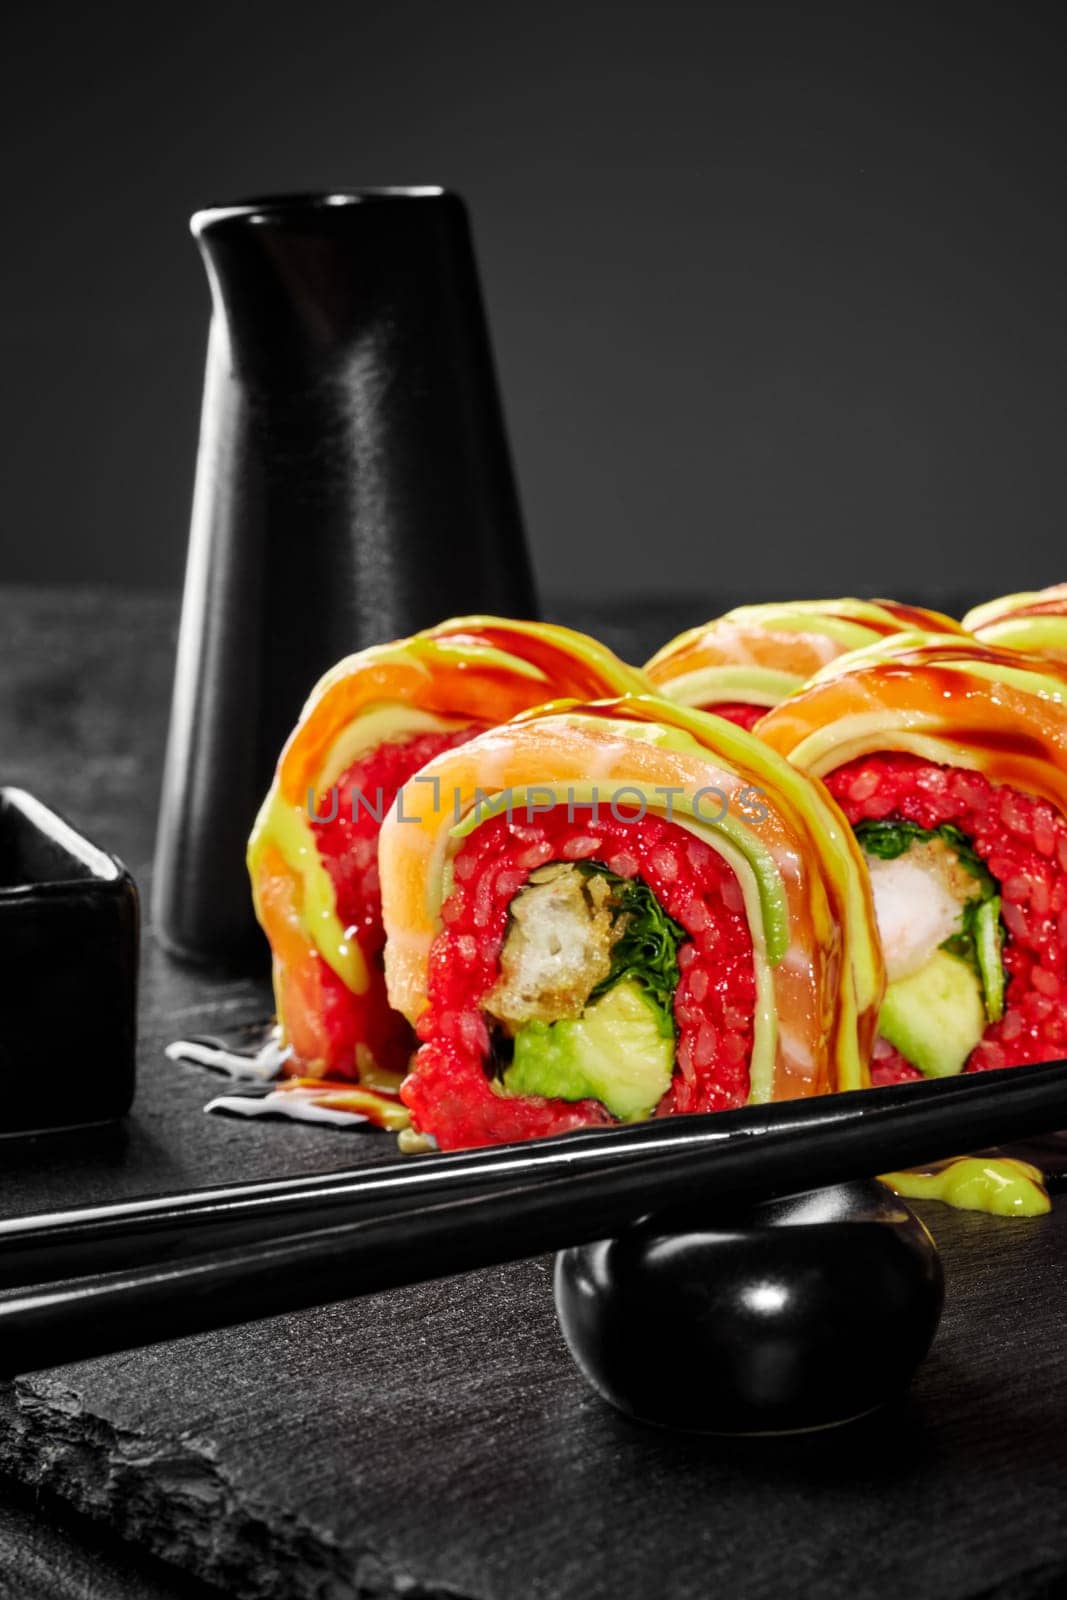 Enticing salmon sushi roll with shrimp tempura and sauces by nazarovsergey